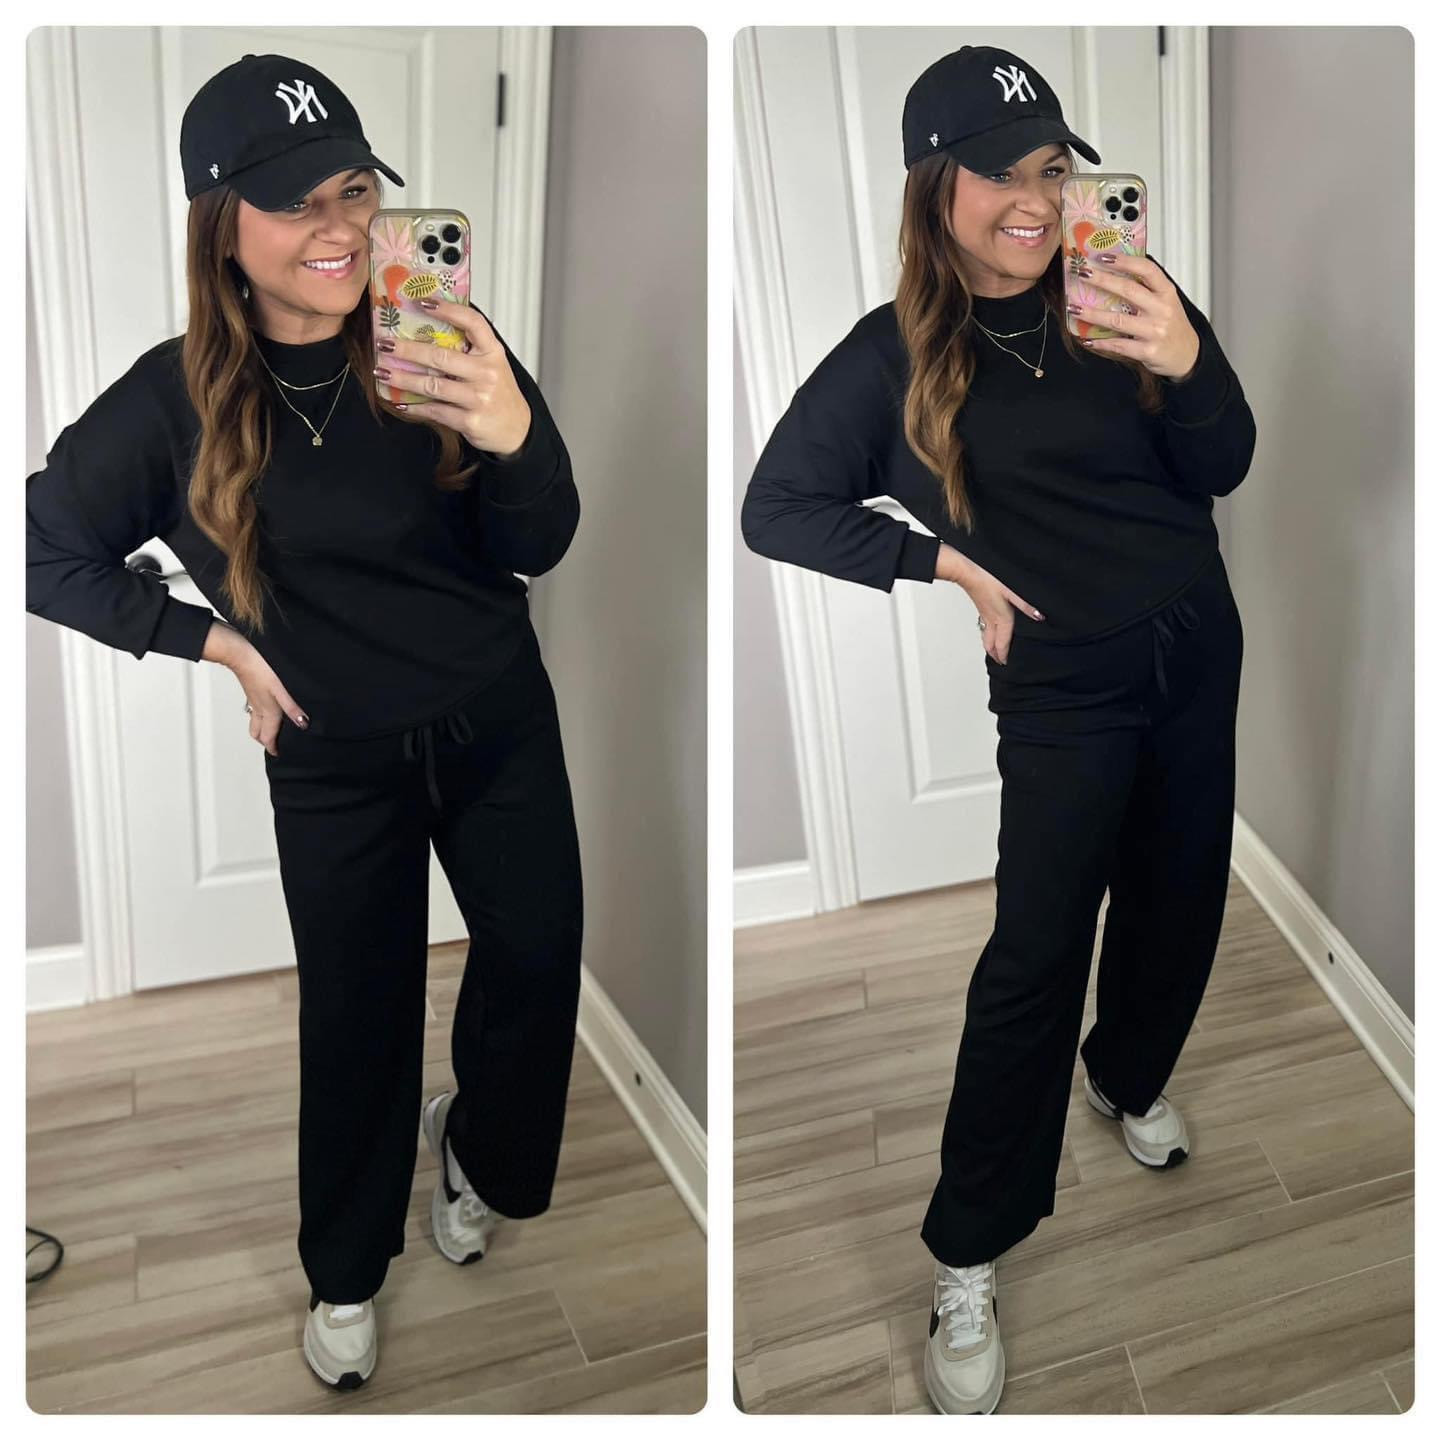 Stylish and Comfortable: Travel Outfit Ideas & Must Haves for Your Next Adventure

travel, travel outfit, vacation, vacation outfit, casual outfit, summer vacation, spring vacation, black outfit, sneakers